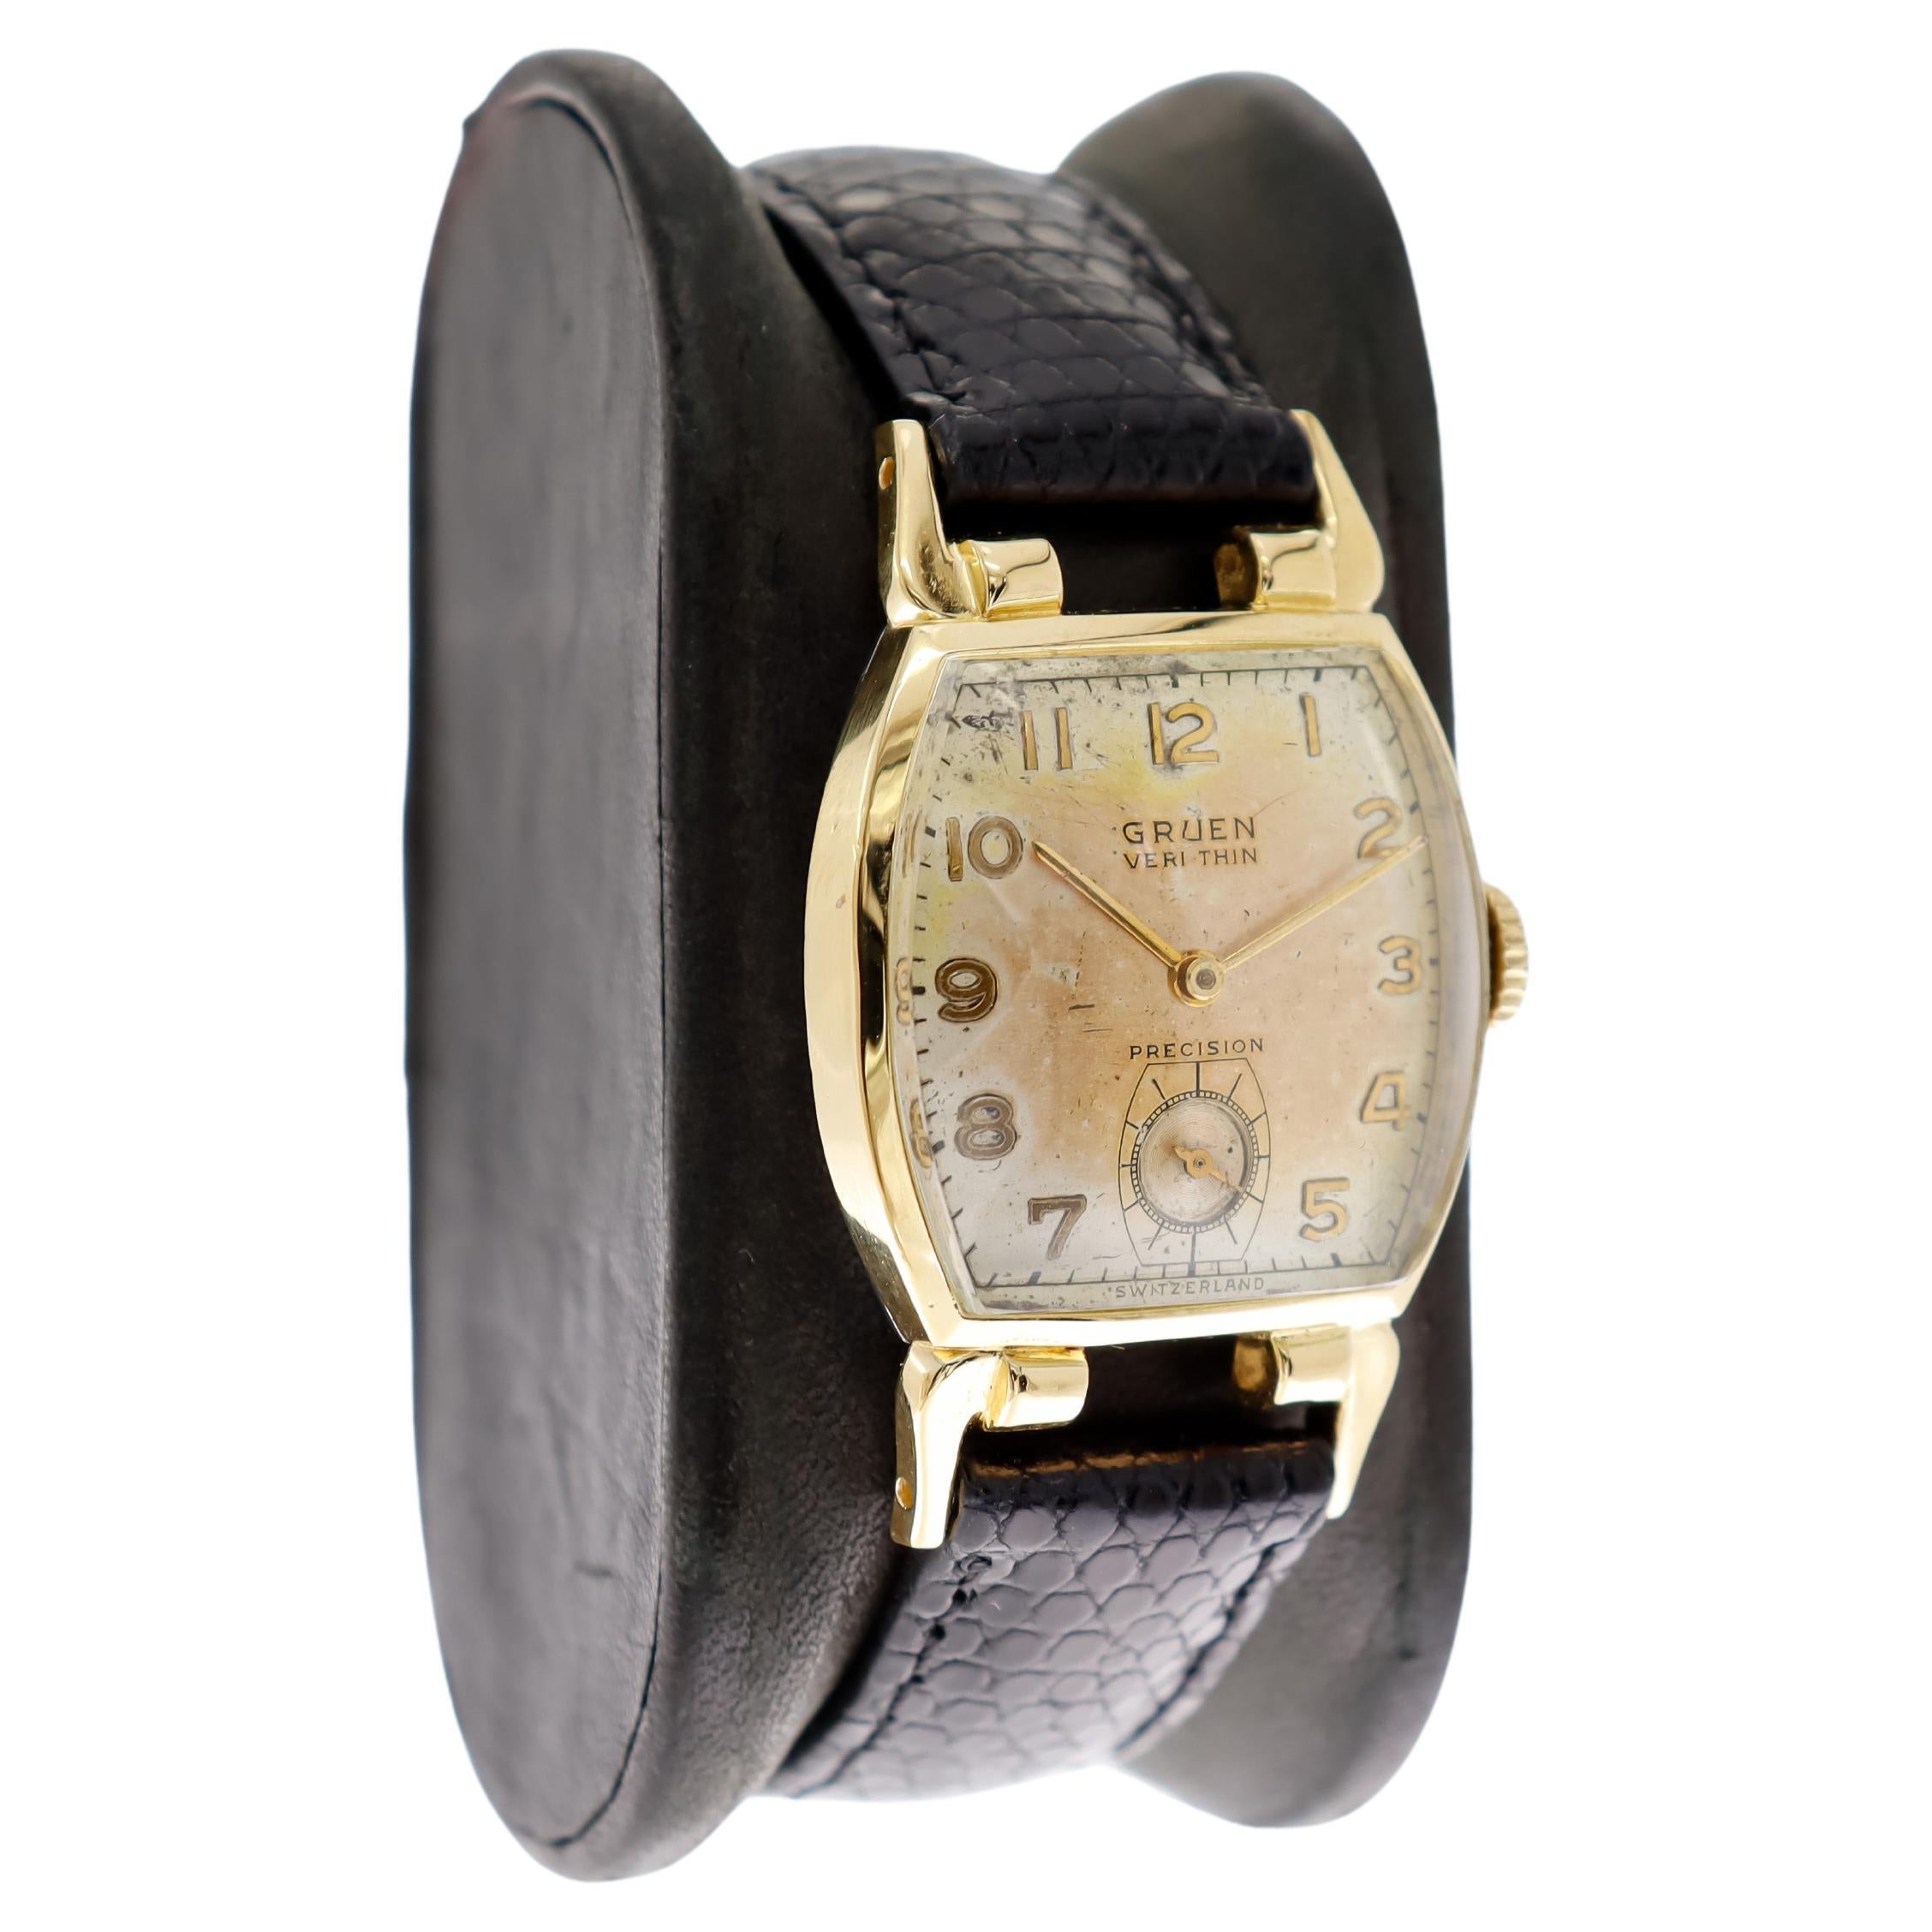 FACTORY / HOUSE: Gruen Watch Company
STYLE / REFERENCE: Art Deco / Reference 5541425
METAL / MATERIAL: Yellow Gold Filled
CIRCA / YEAR: 1947
DIMENSIONS / SIZE: Length 40mm X Diameter 25mm
MOVEMENT / CALIBER: Manual Winding / 17 Jewels / Caliber